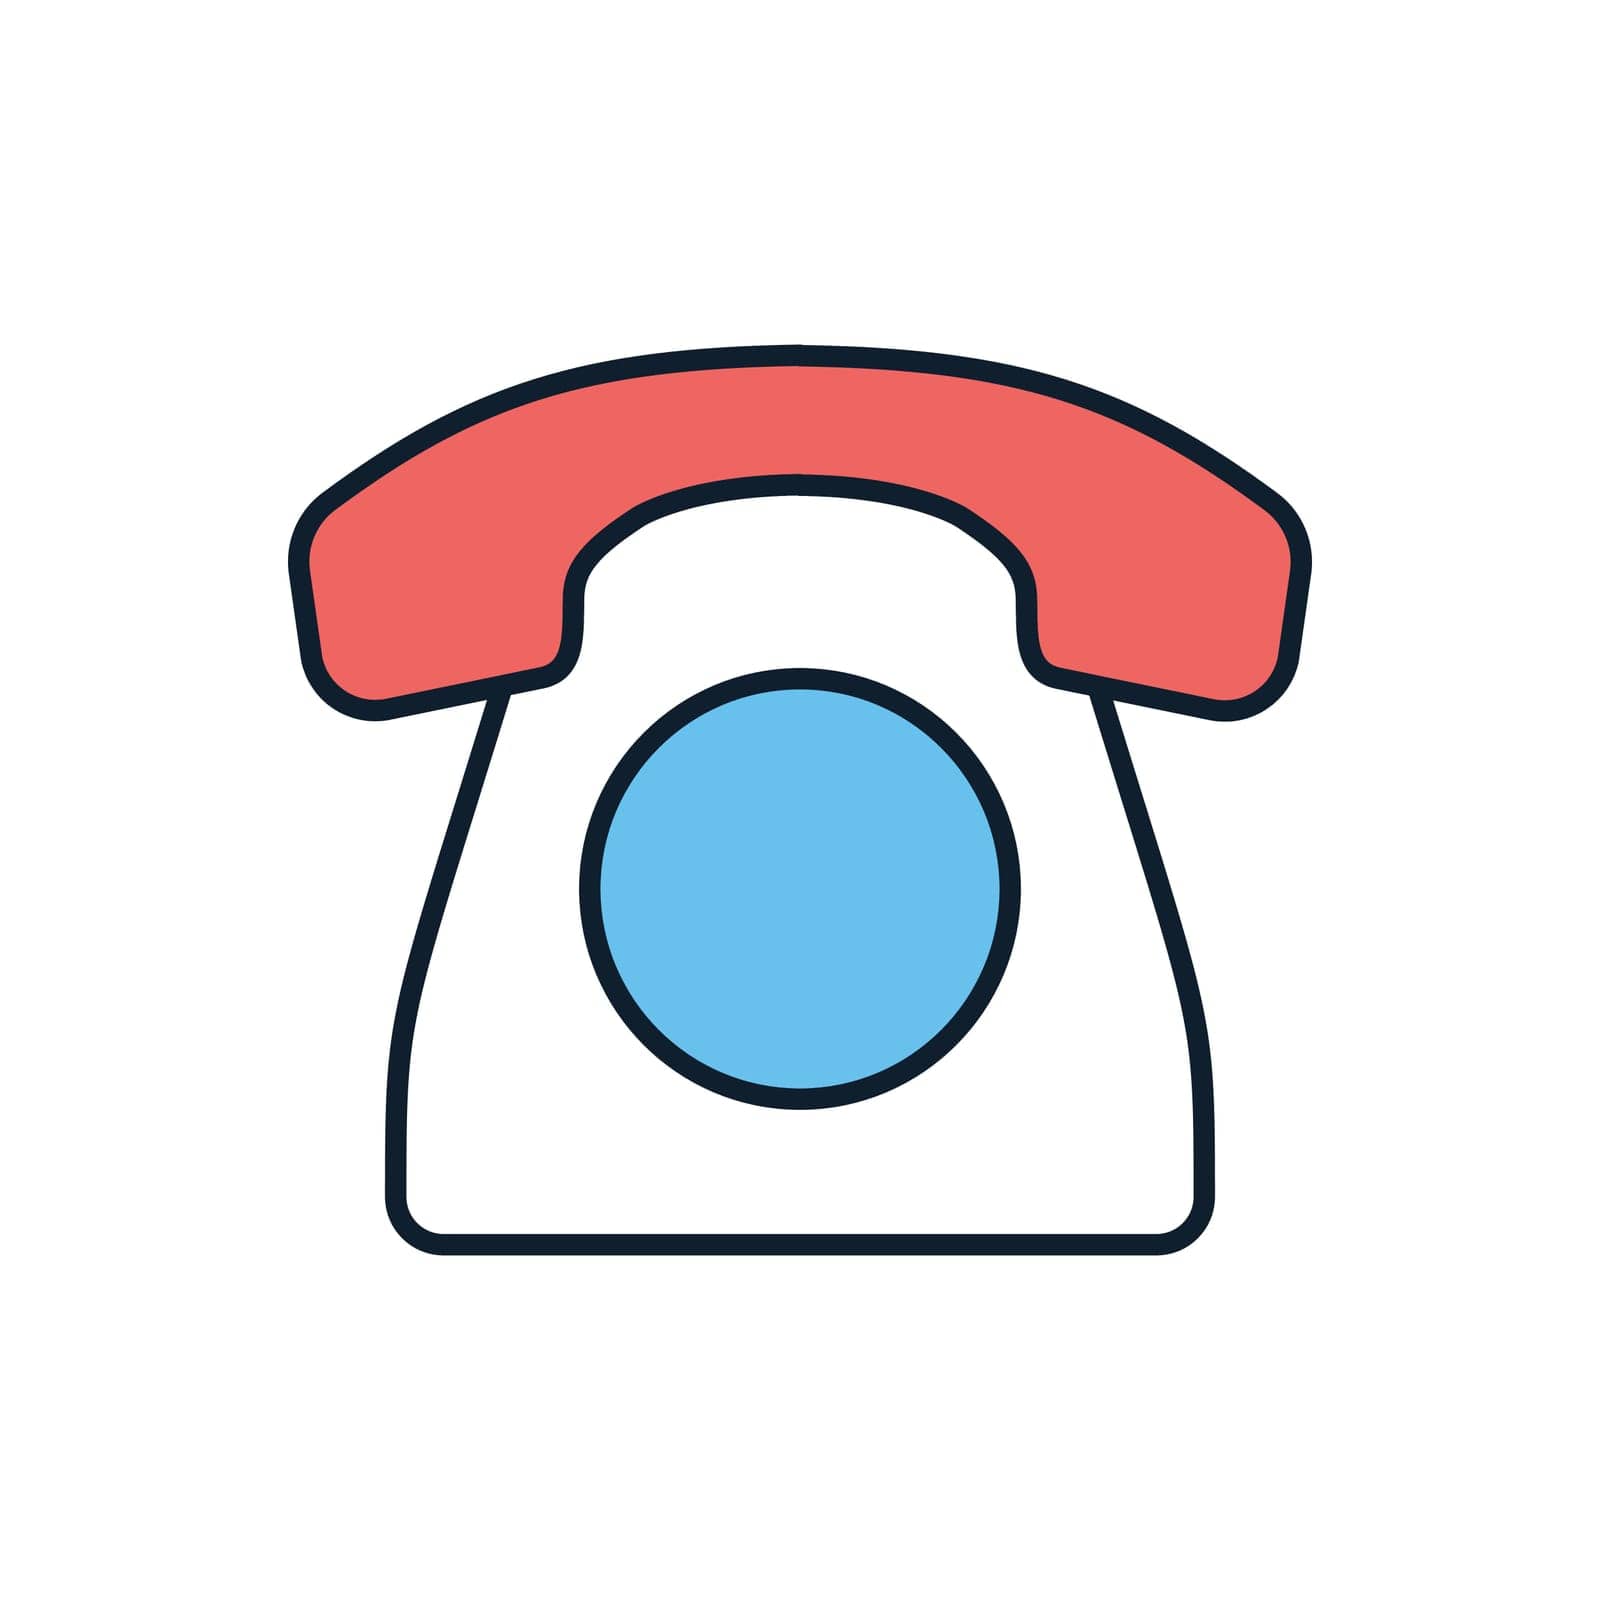 Vintage Phone related vector icon by smoki